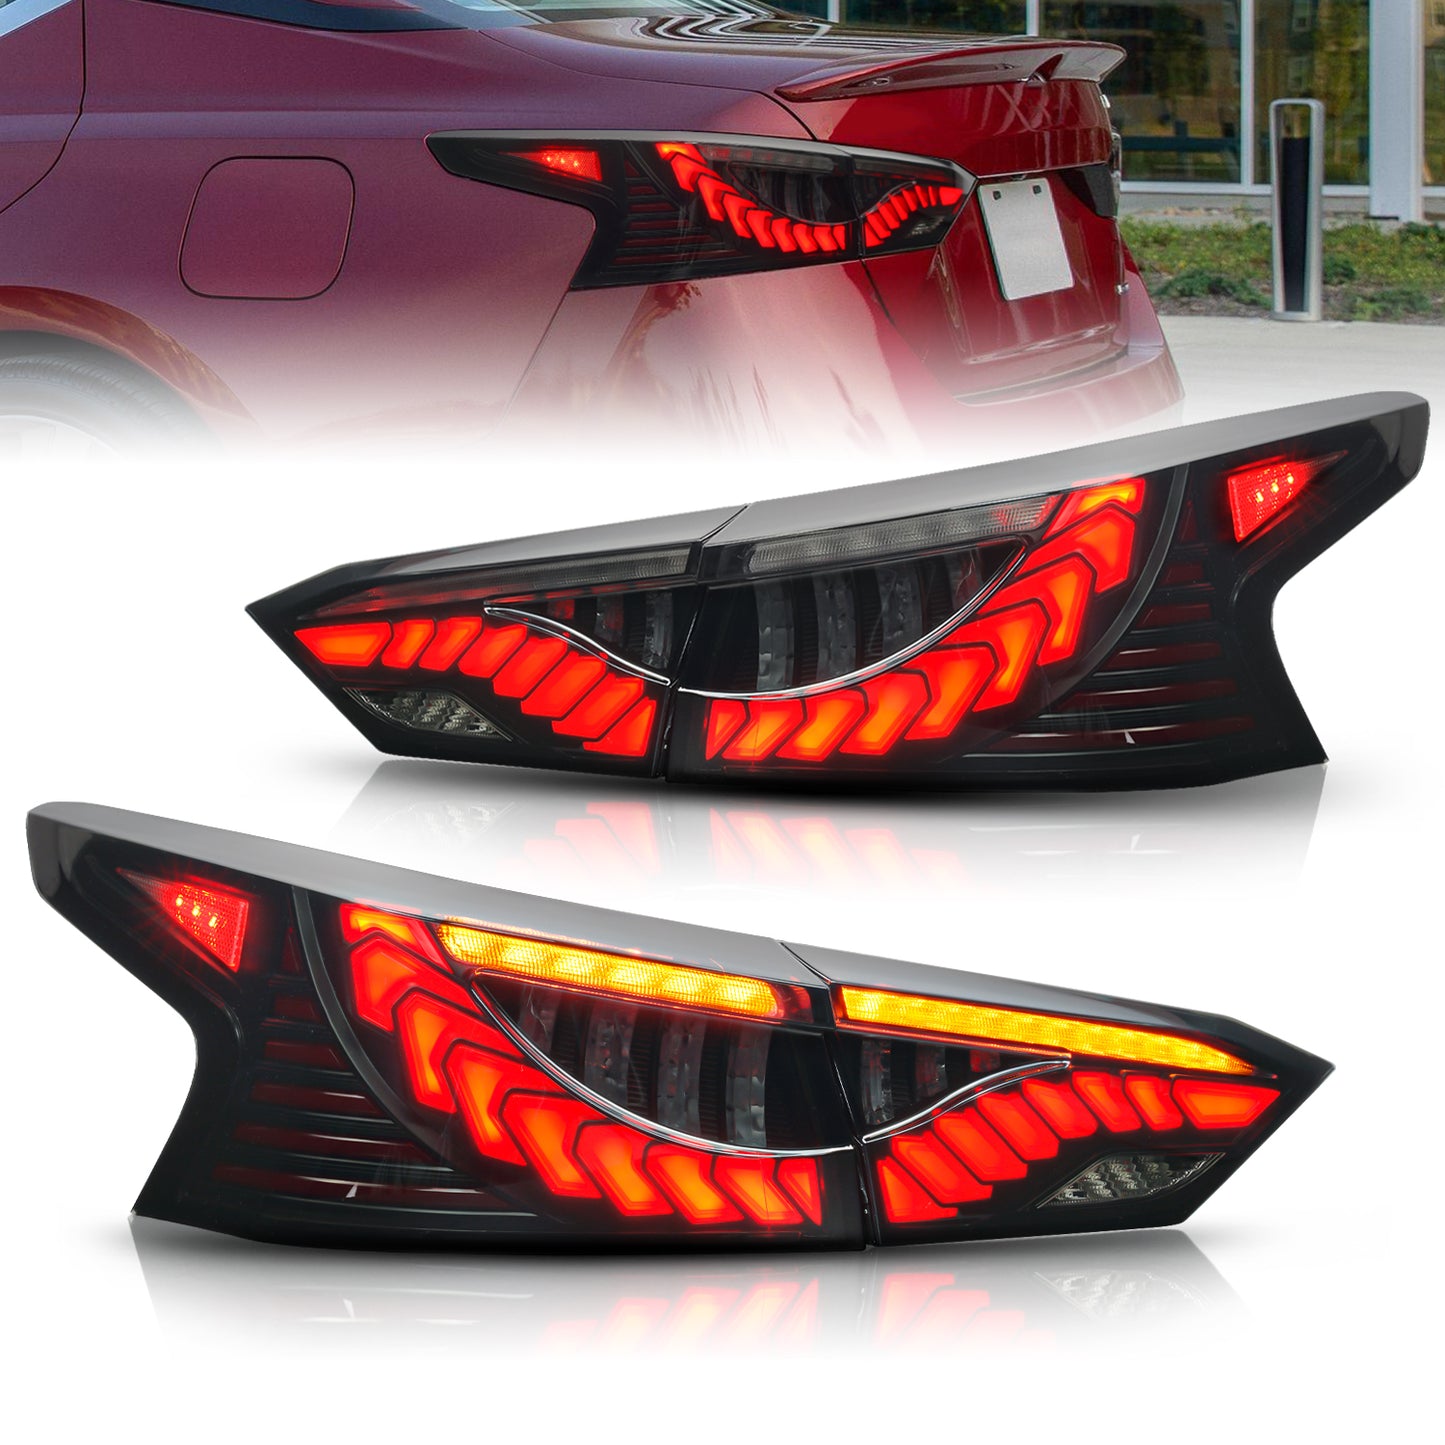 Full LED Tail Lights Assembly For 6th Gen Nissan Altima  2019-2022